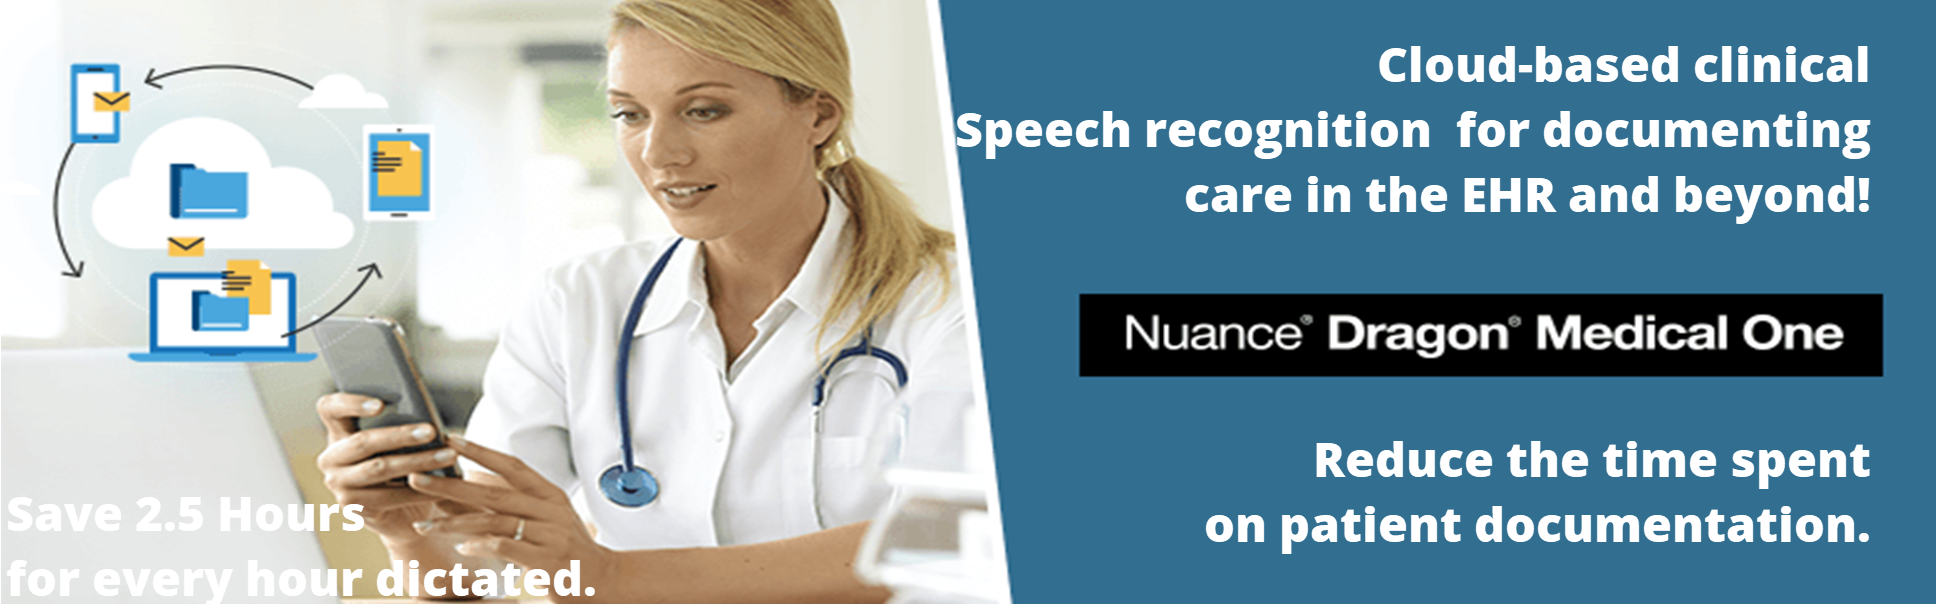 Reduce the time spent on patient documentation - Cloud-based clinical speech recognition for documenting care in the EHR and beyond.